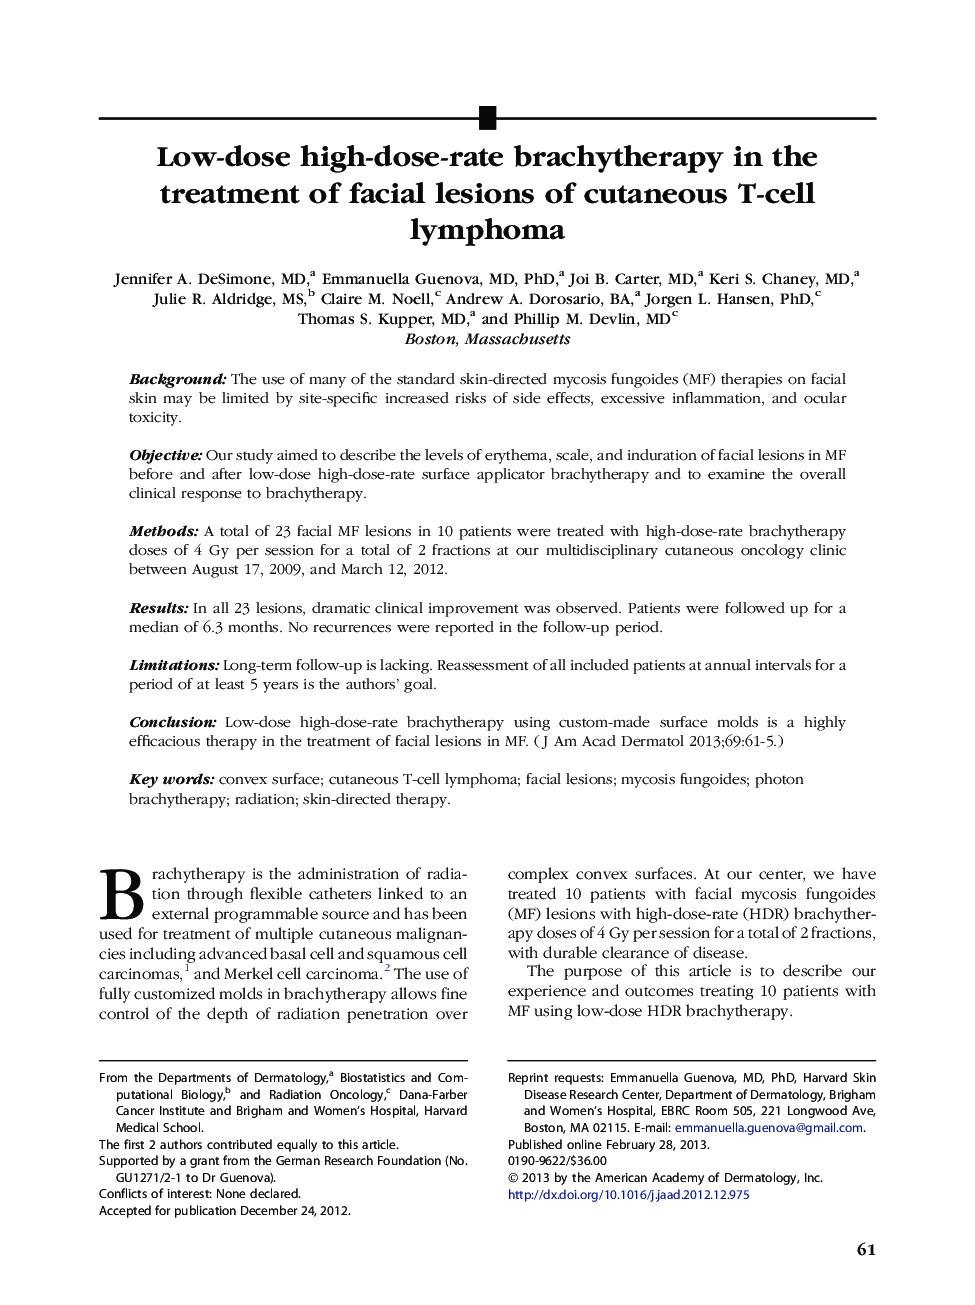 Low-dose high-dose-rate brachytherapy in the treatment of facial lesions of cutaneous T-cell lymphoma 